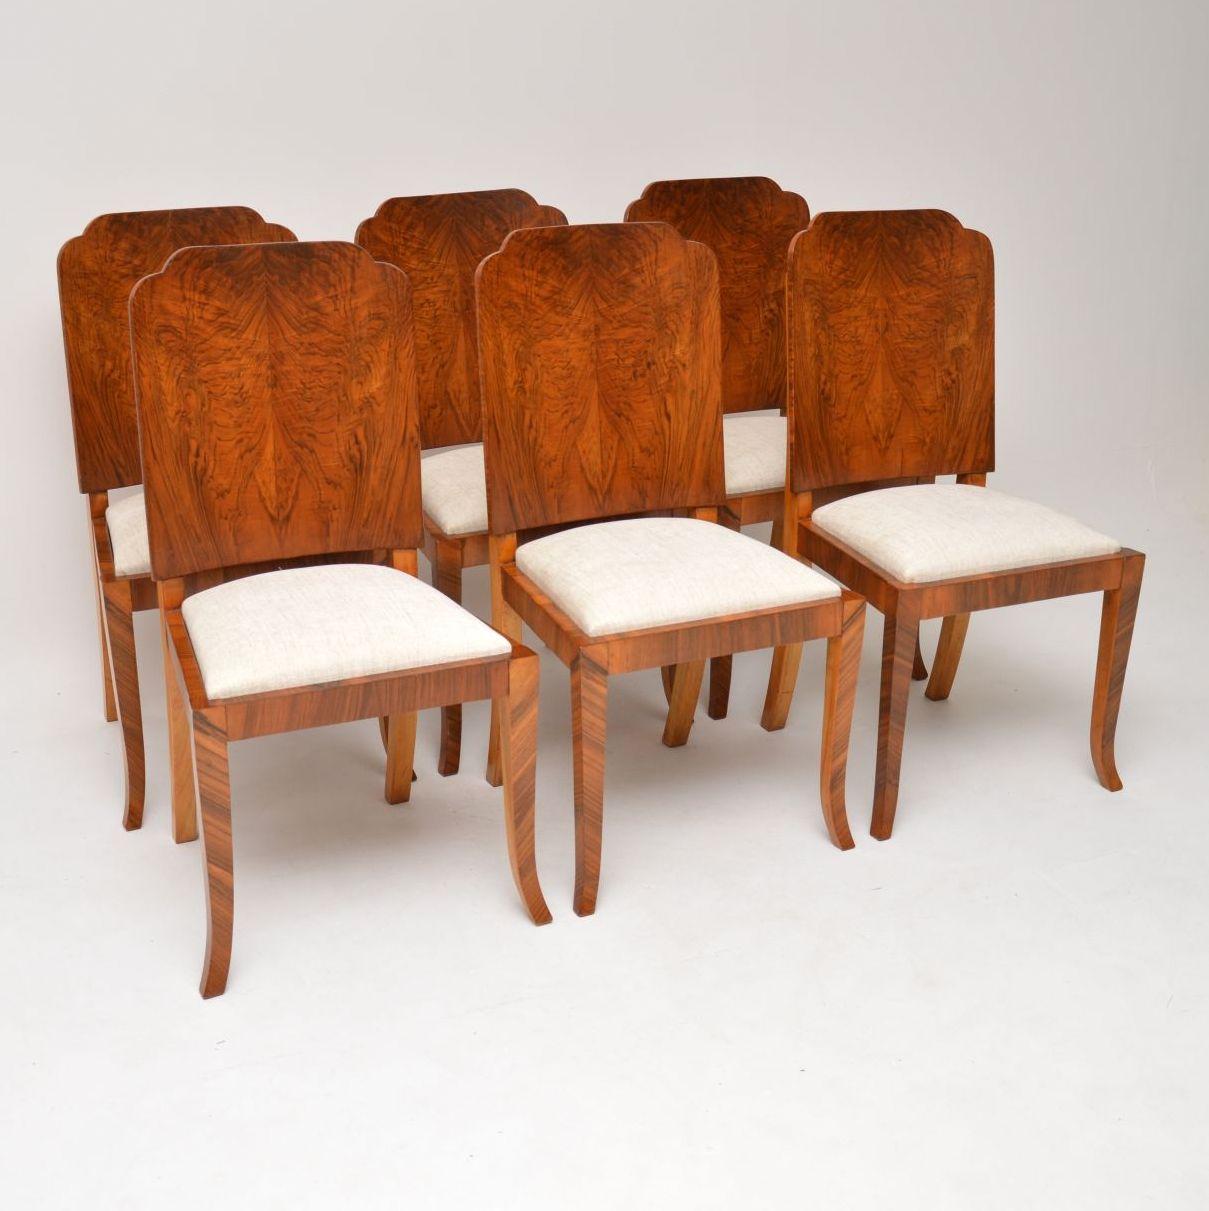 1920s Original Art Deco Walnut Dining Table and Chairs 7